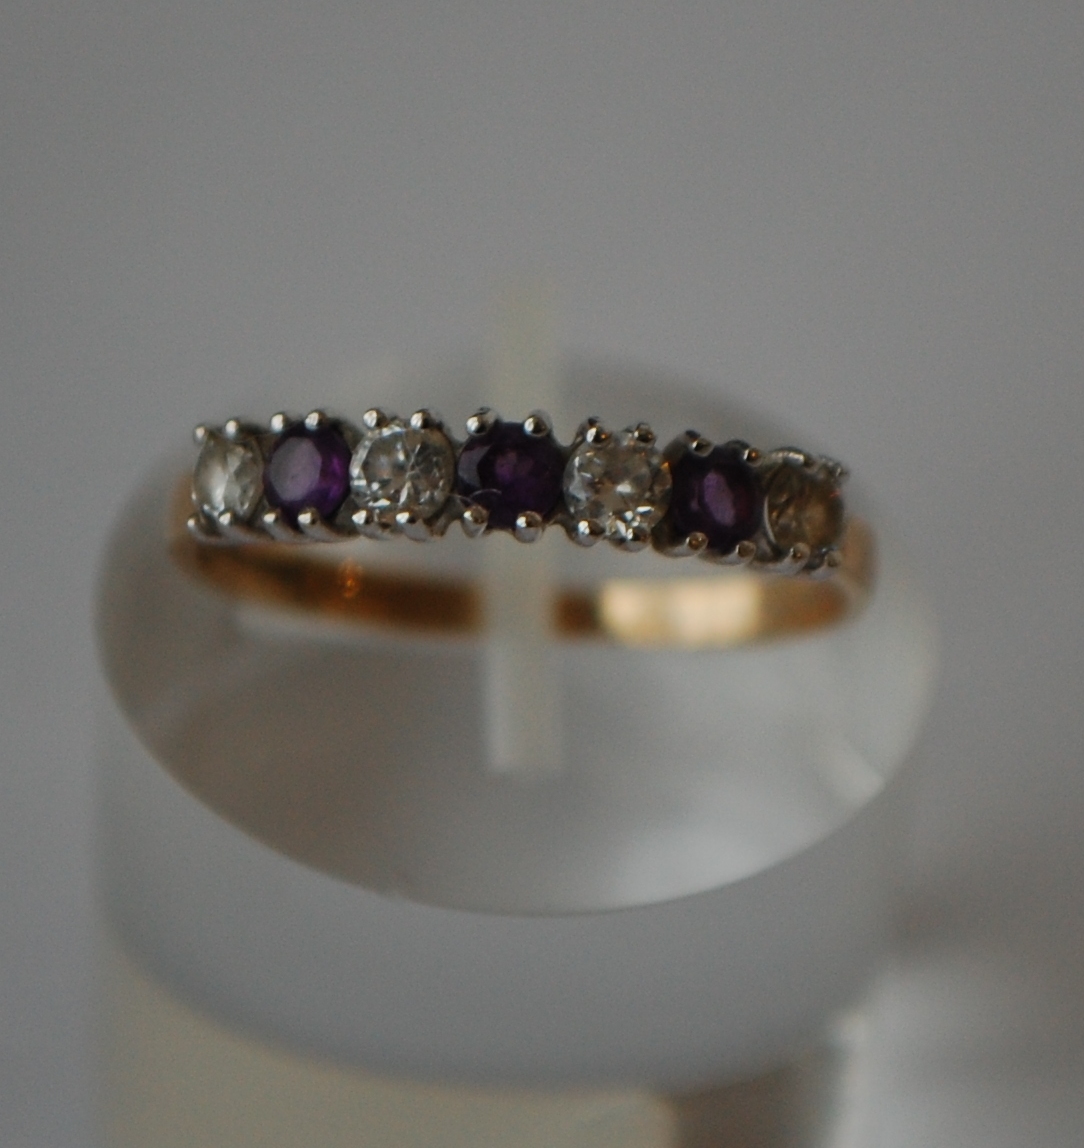 A hallmarked 9ct  seven stone gold ring being set with alternating white and purple stones. - Image 2 of 2